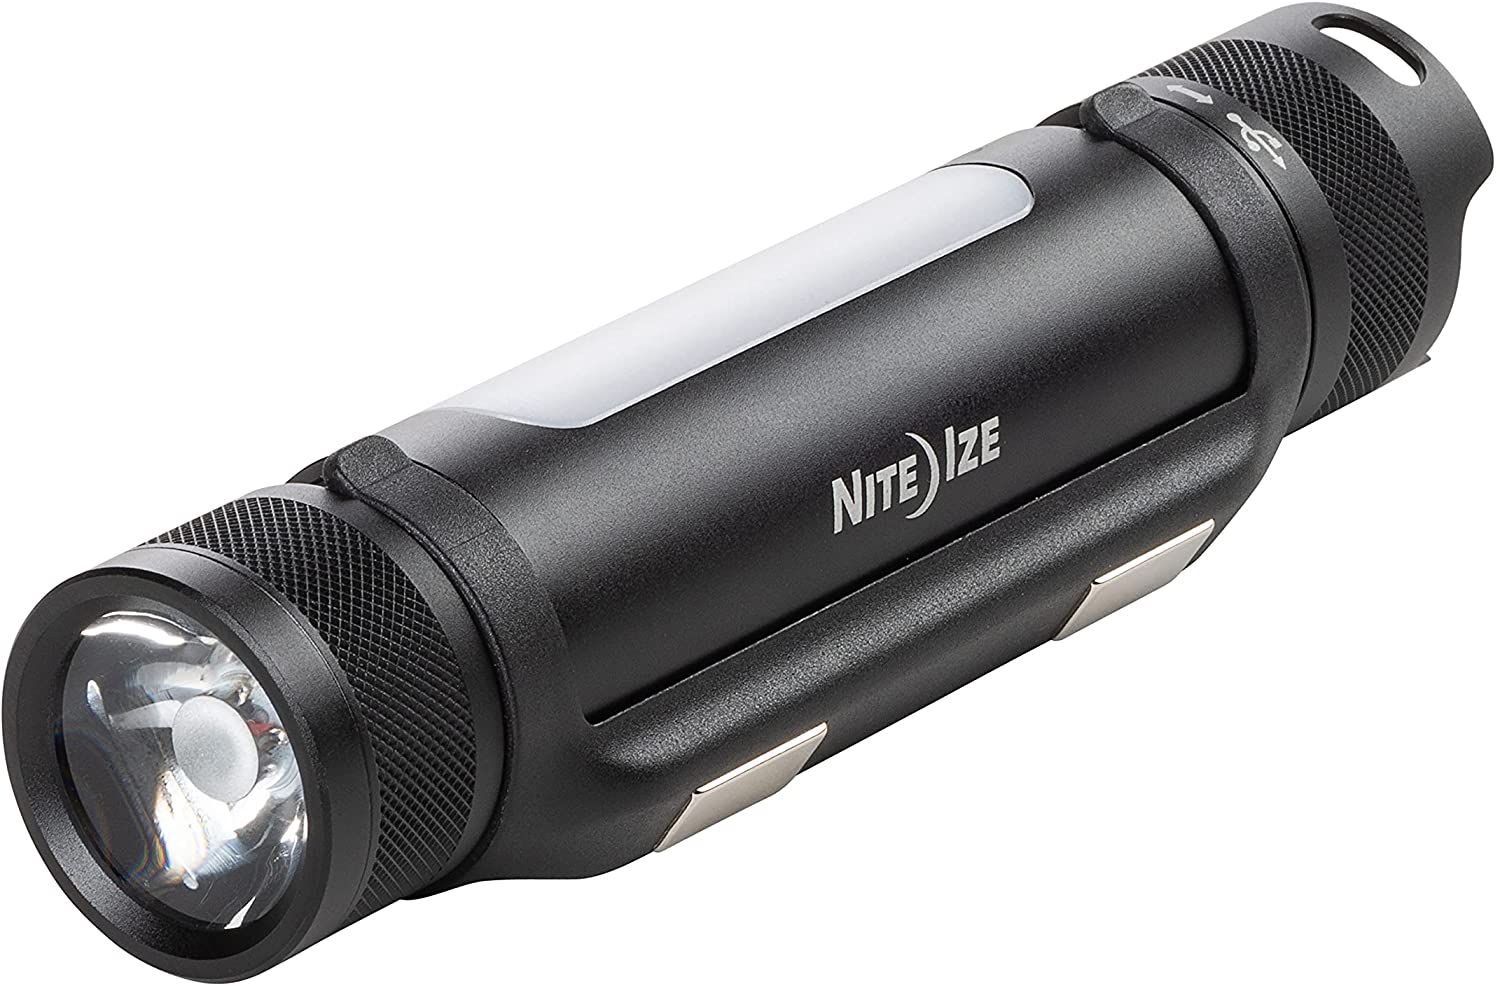 Niteize Radiant® Rechargeable Utility Light